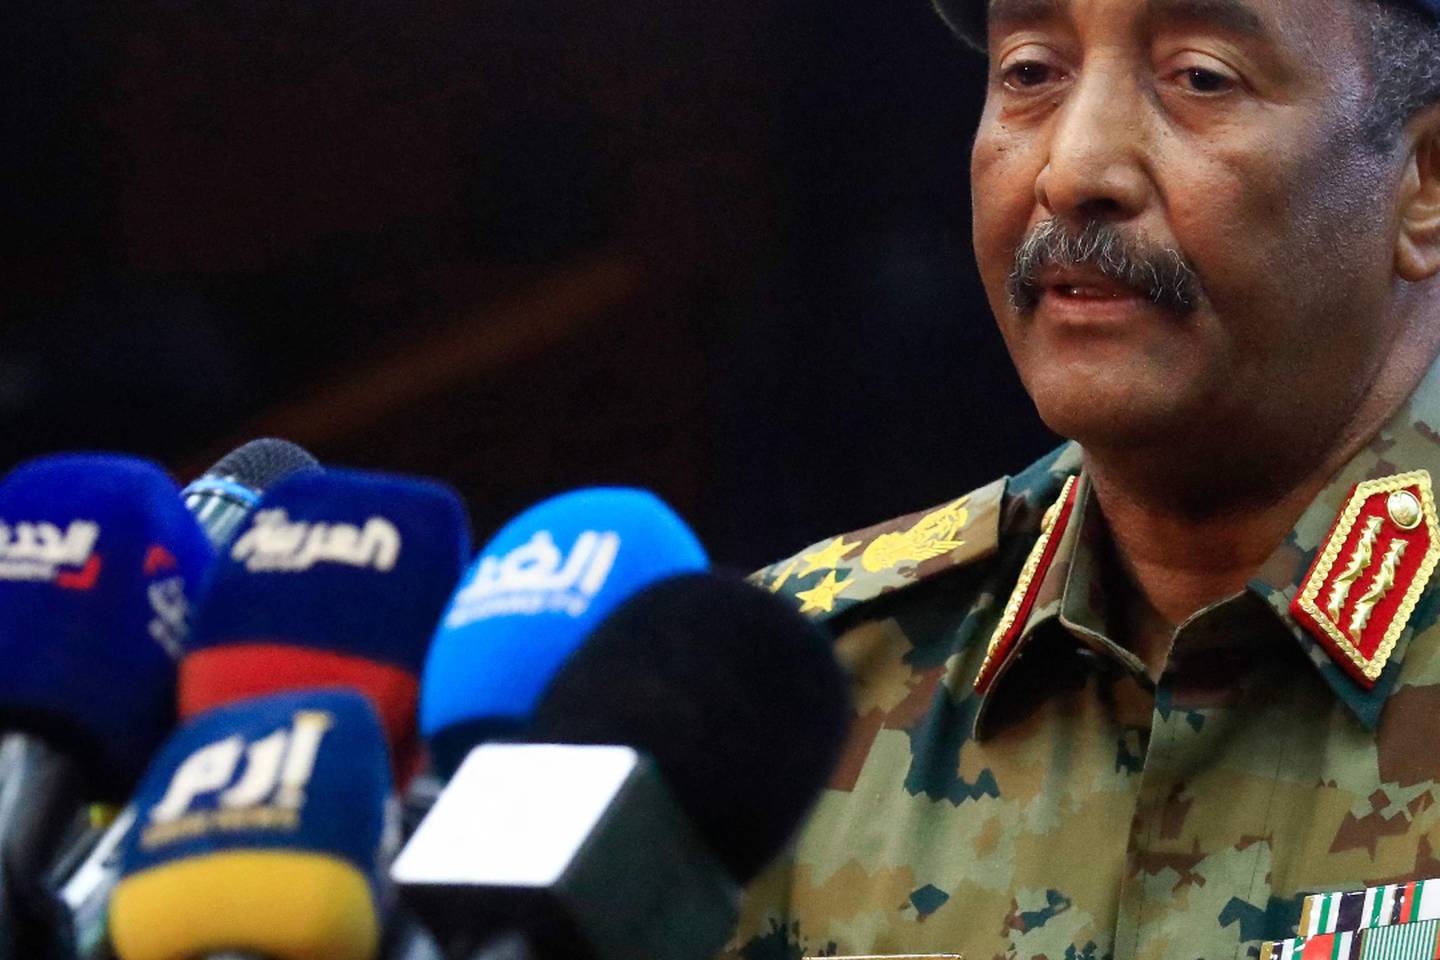 Sudan's top general claims military takeover was meant to prevent civil war